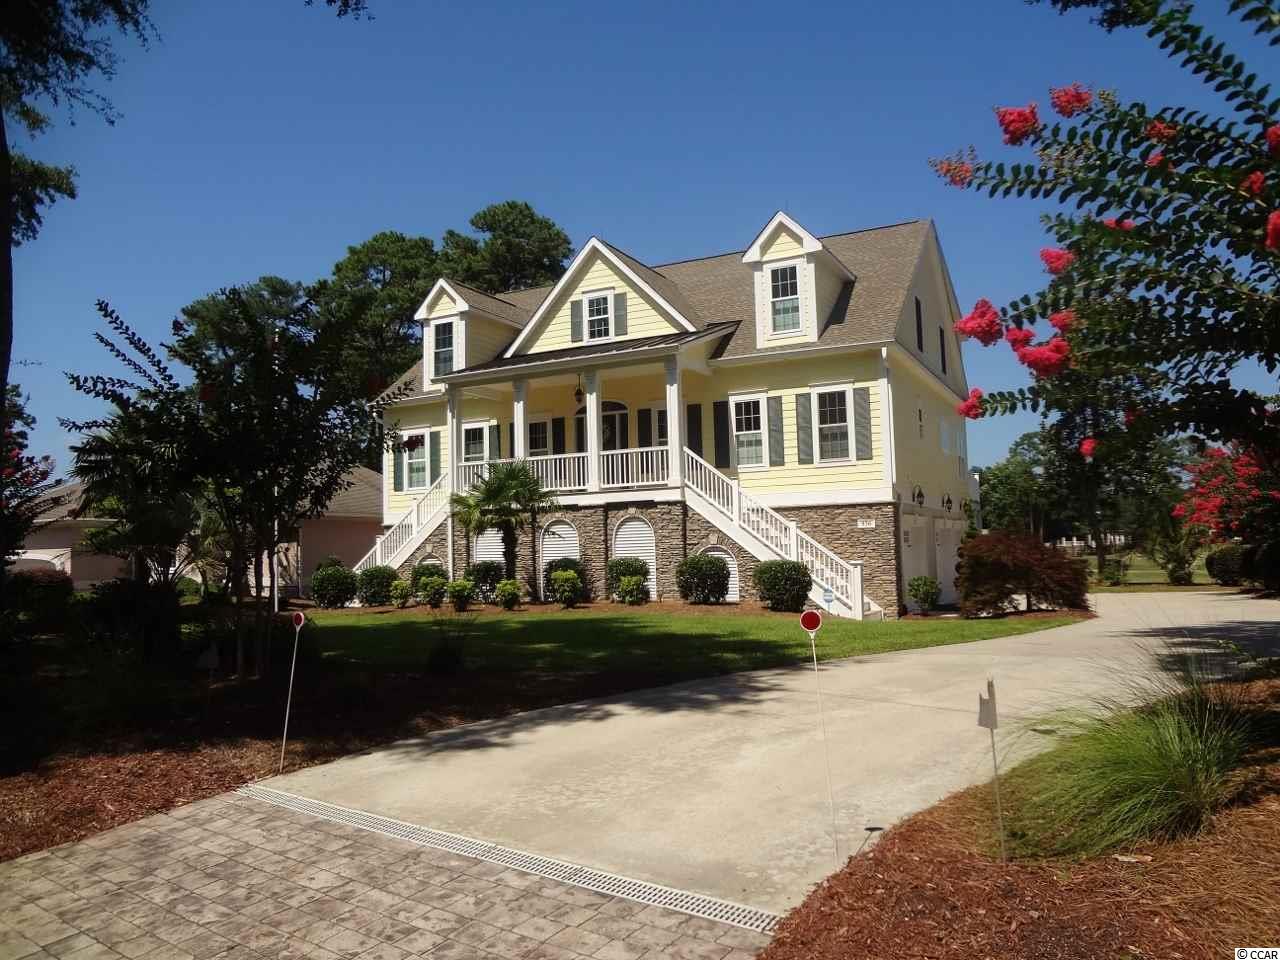 936 Oyster Pointe Dr. Sunset Beach, NC 28468